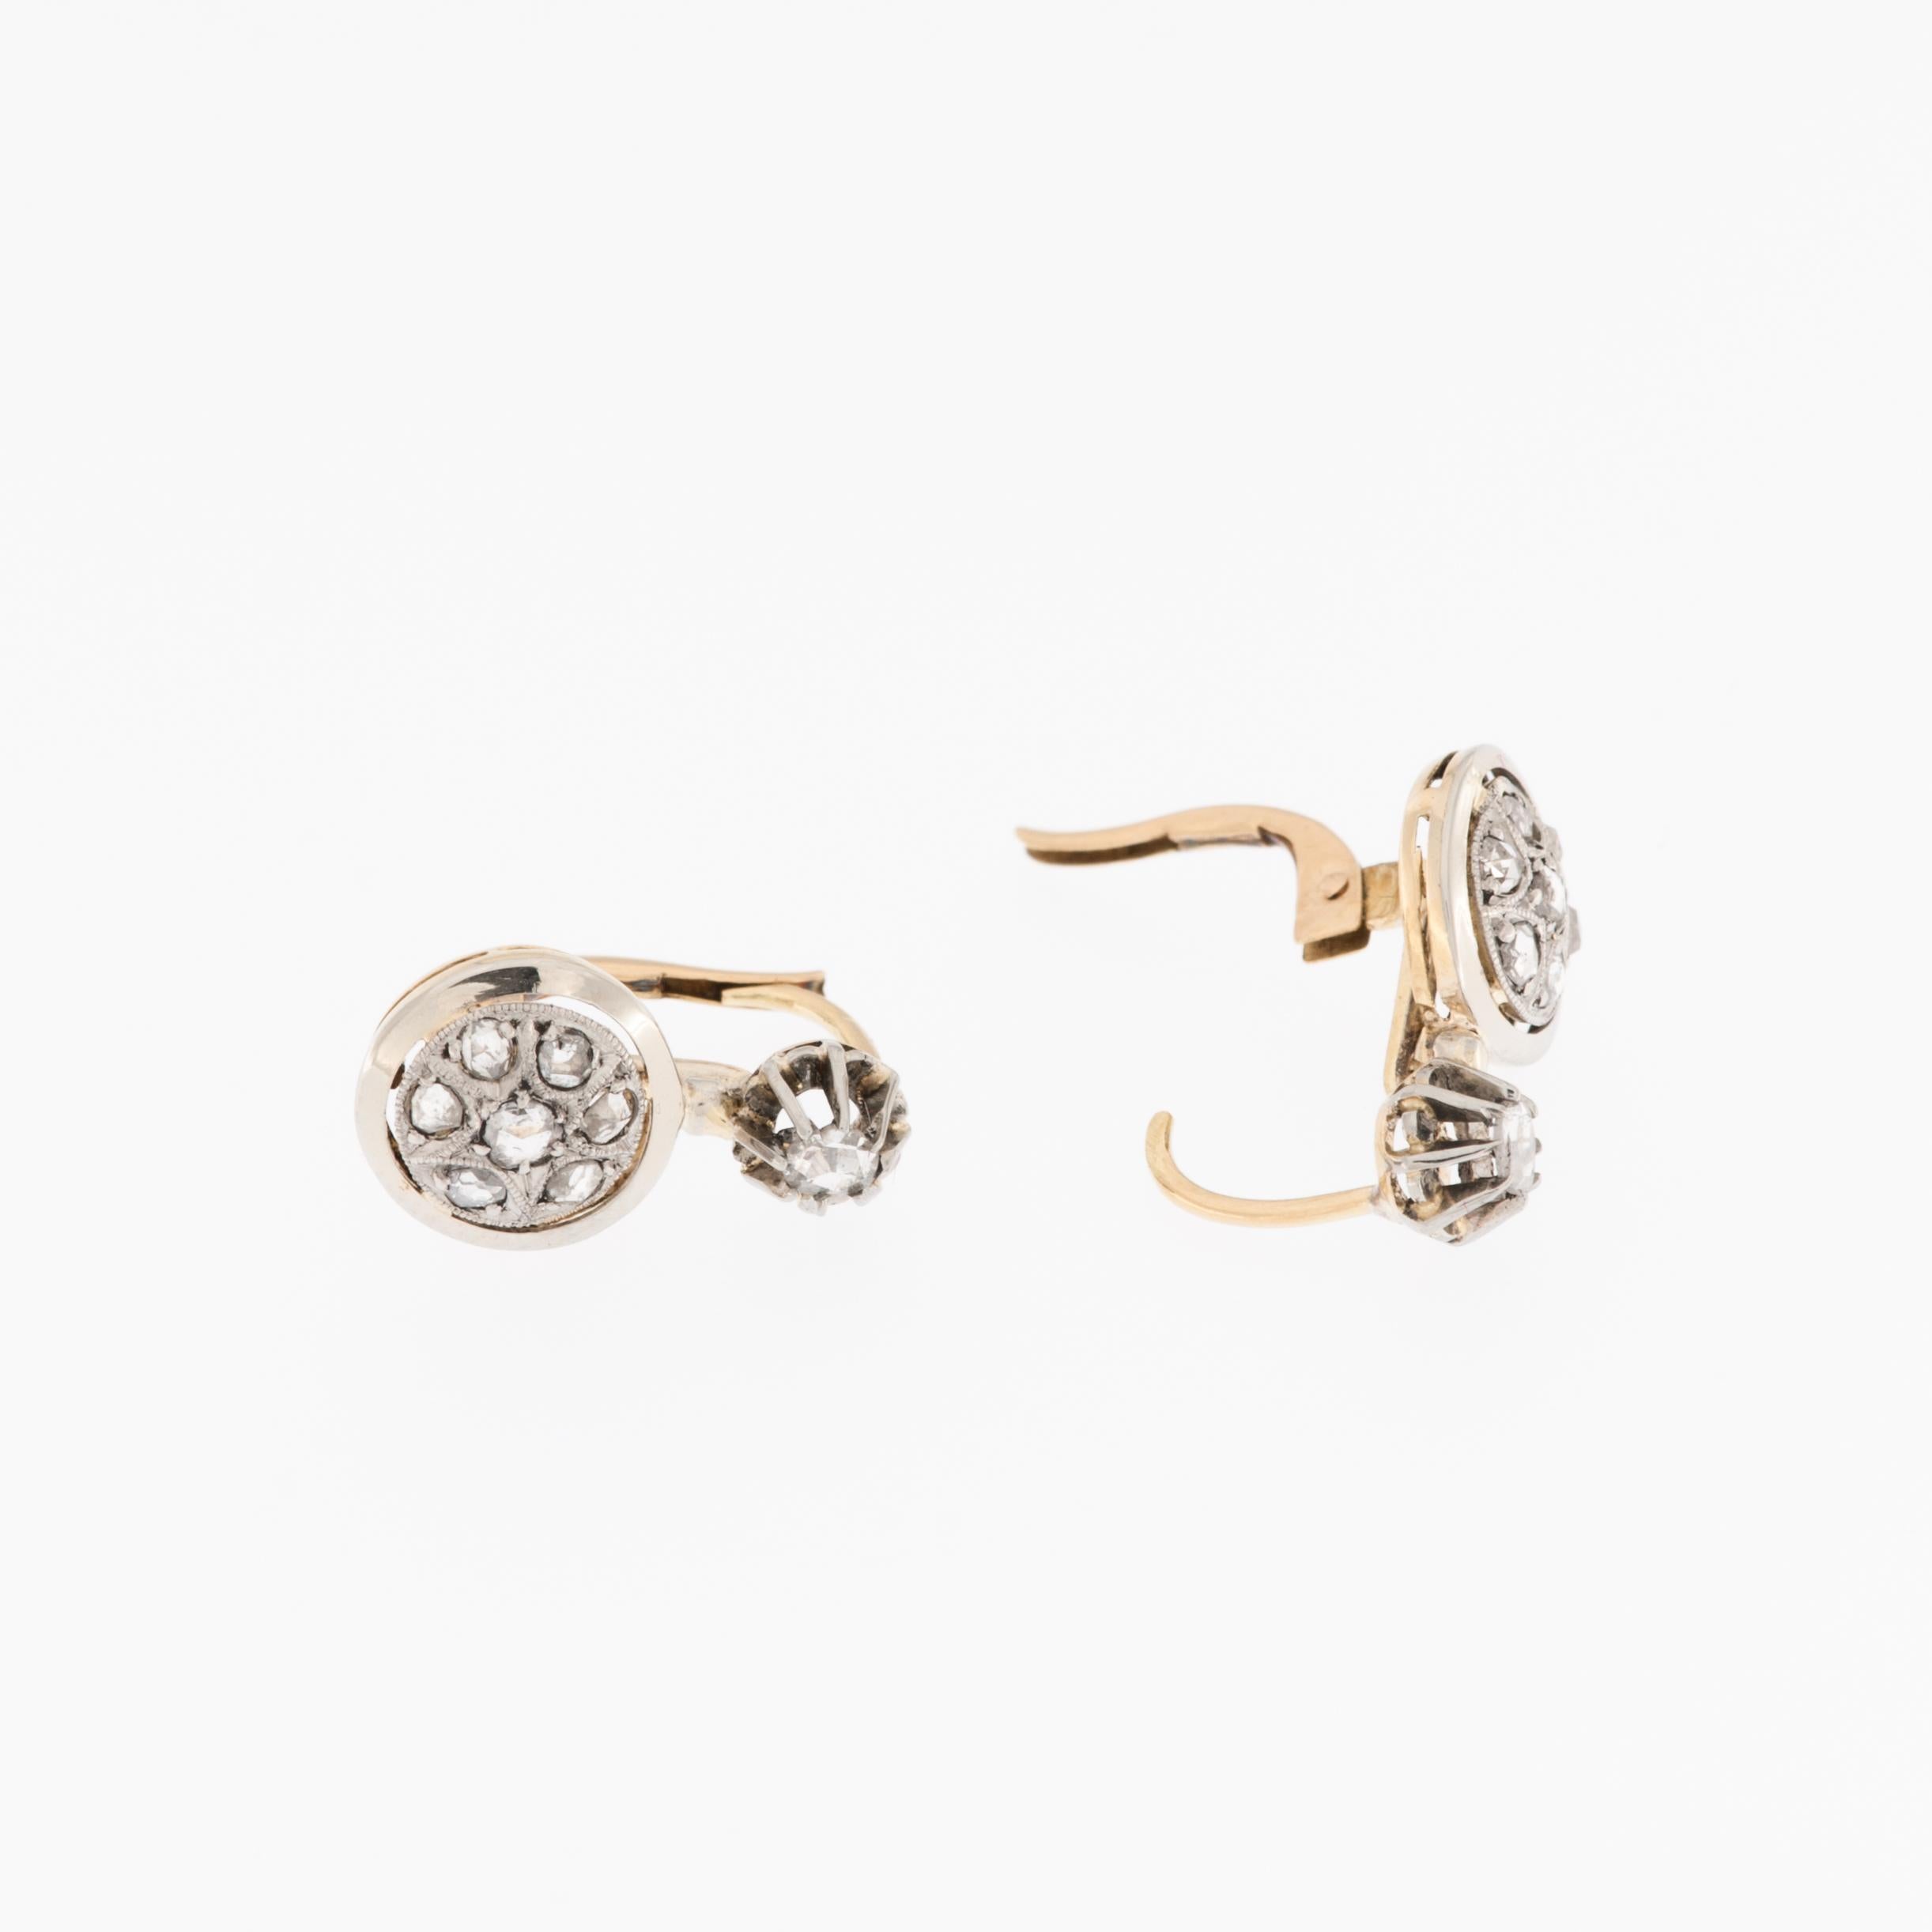 The Art Deco 18kt Gold Earrings with Old-Cut Diamonds are a stunning piece of jewelry that embodies the elegance and sophistication of the Art Deco era. 

The earrings are crafted from 18-karat gold, which is known for its durability and lustrous